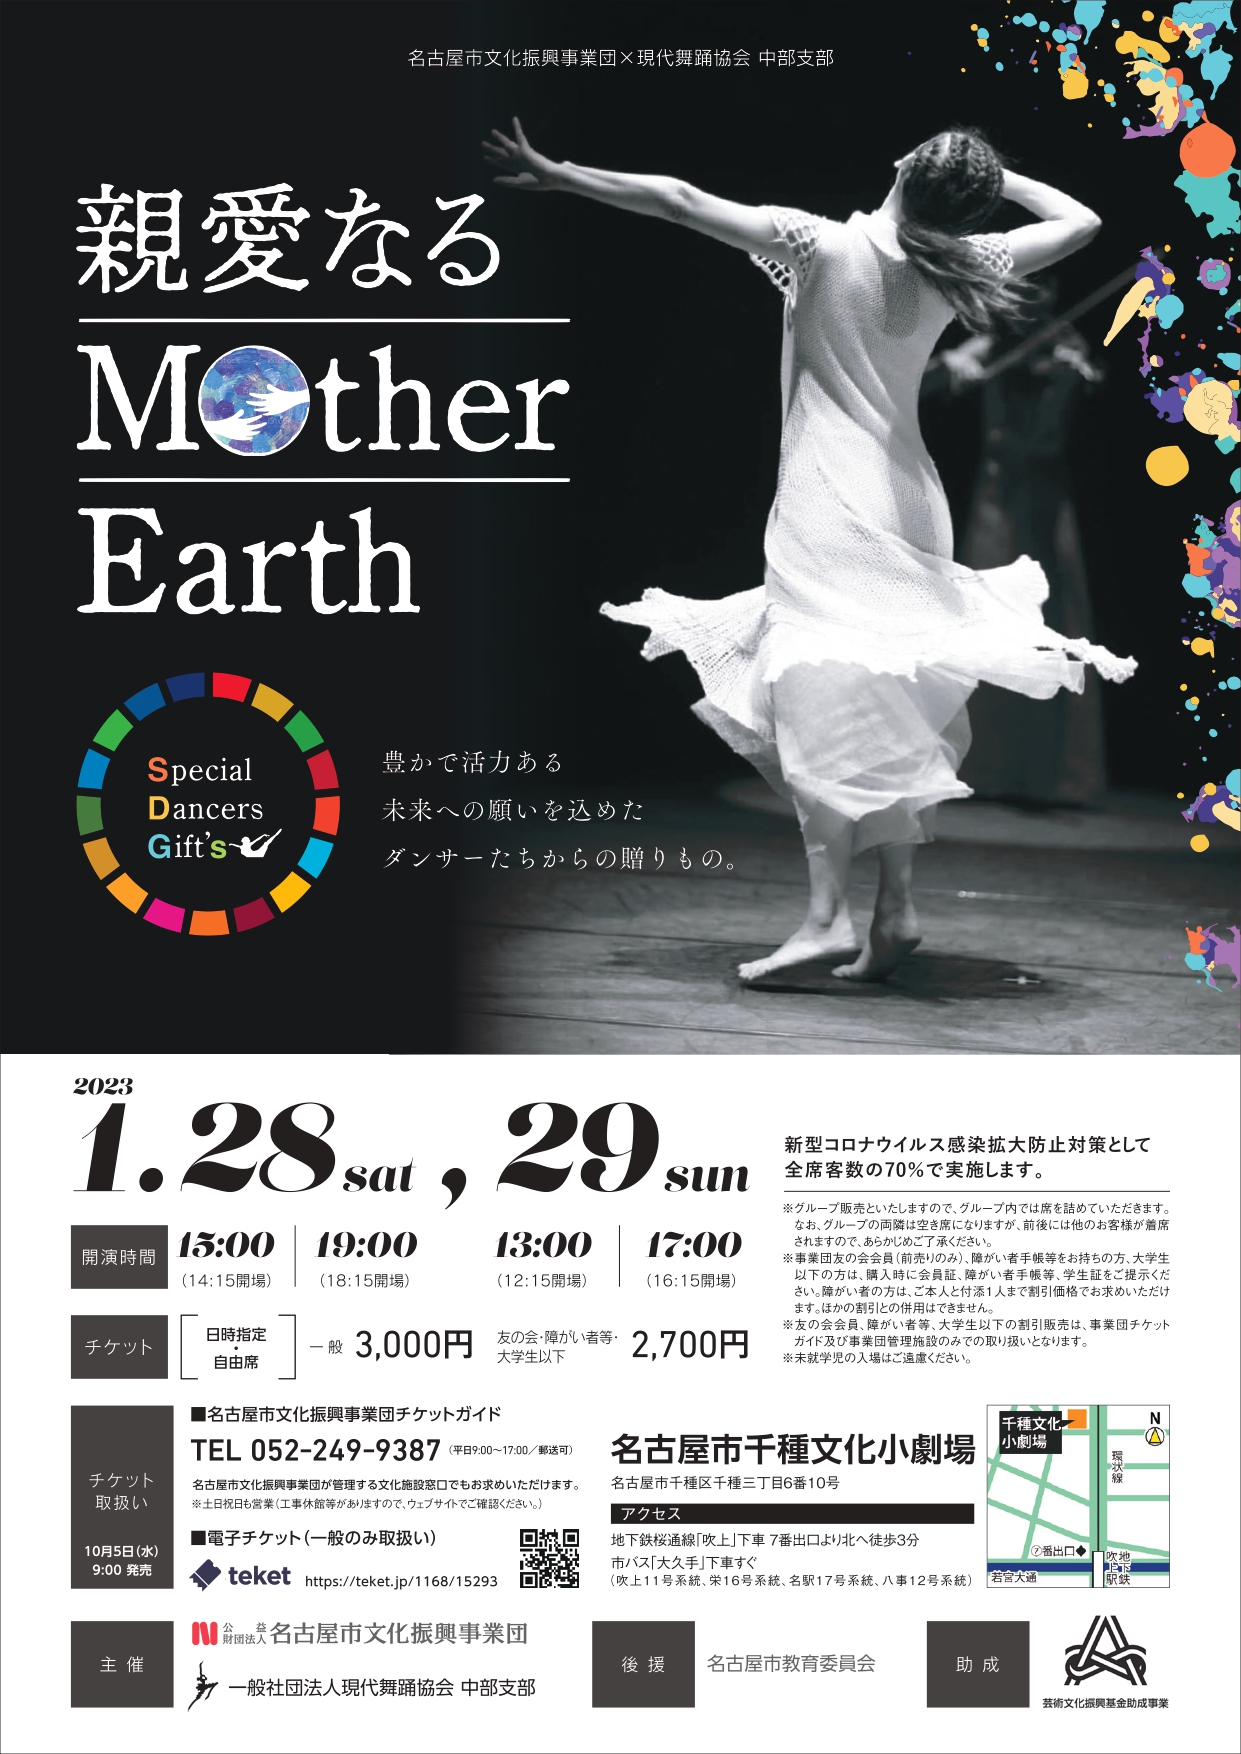 Special Dancers' Gifts ～親愛なるMother Earth～のチラシ